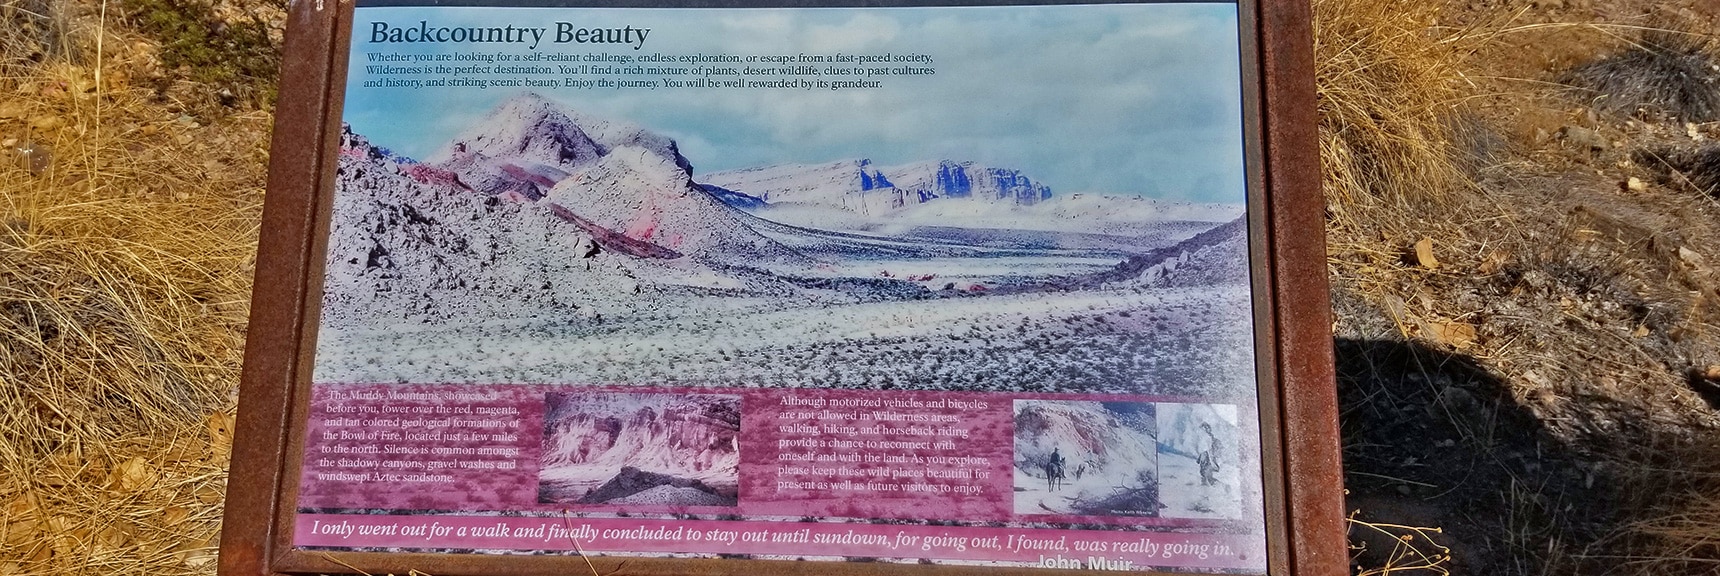 Interpretive Display of Wonders of Back Country Around Callville Bay | Callville Summit Trail | Lake Mead National Recreation Area, Nevada